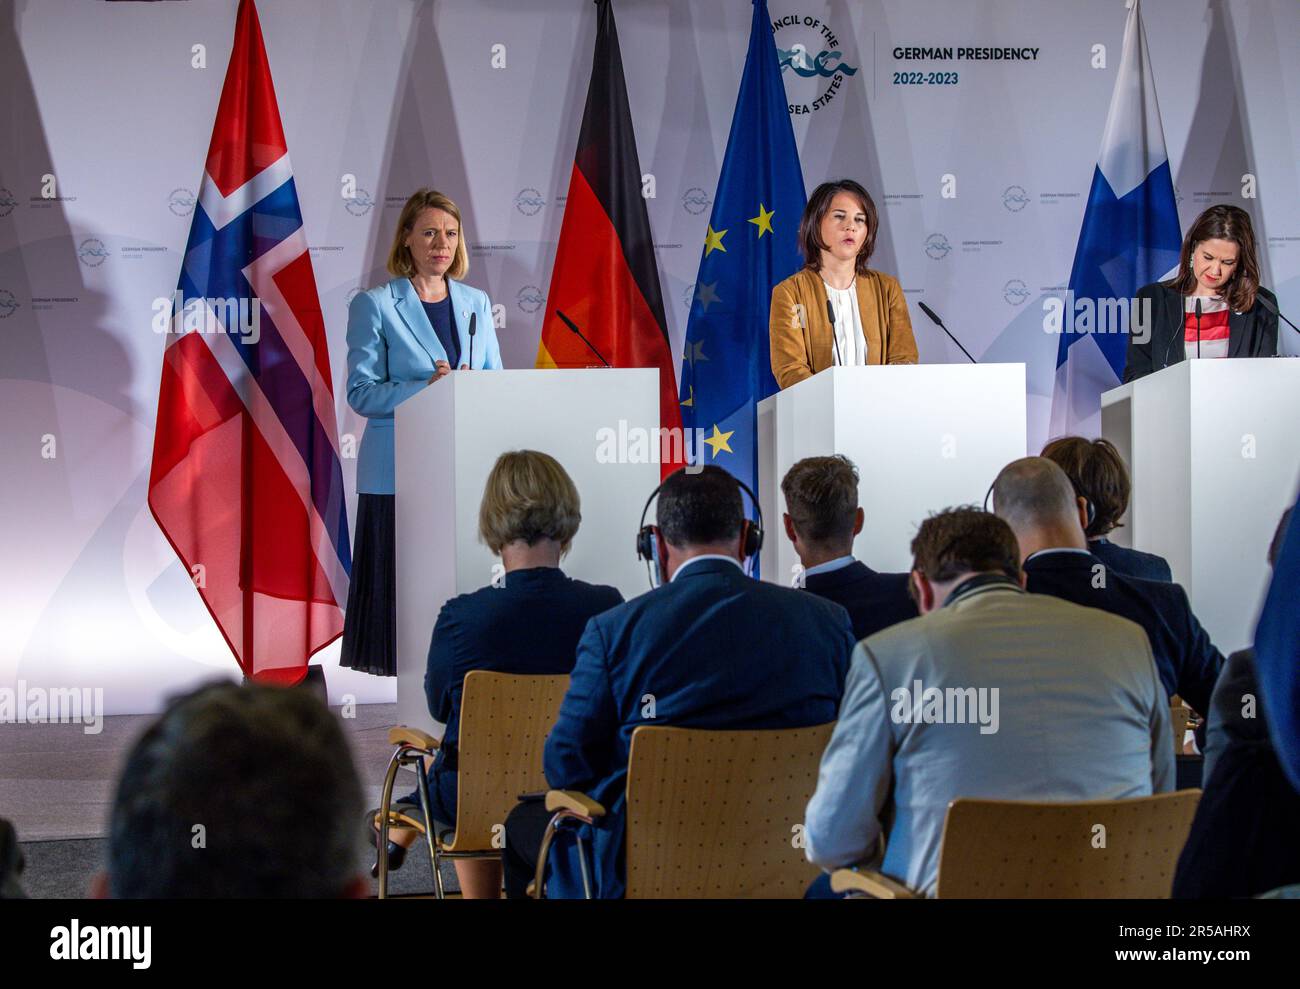 Mecklenburg-Western Pomerania, Wismar: 02 June 2023,  Annalena Baerbock (Bündnis 90/Die Grünen, M), German Foreign Minister, attends a press conference after the Council of the Baltic Sea States meeting together with Anniken Huitfeldt (l), Foreign Minister of Norway, and Johanna Sumuvuori (r), State Secretary at the Ministry of Foreign Affairs in Finland. The eight Baltic Sea states of Germany, Denmark, Estonia, Finland, Lithuania, Latvia, Poland and Sweden, Iceland, Norway and the EU are discussing further responses to Russia's war of aggression on Ukraine, enhancing energy security through t Stock Photo